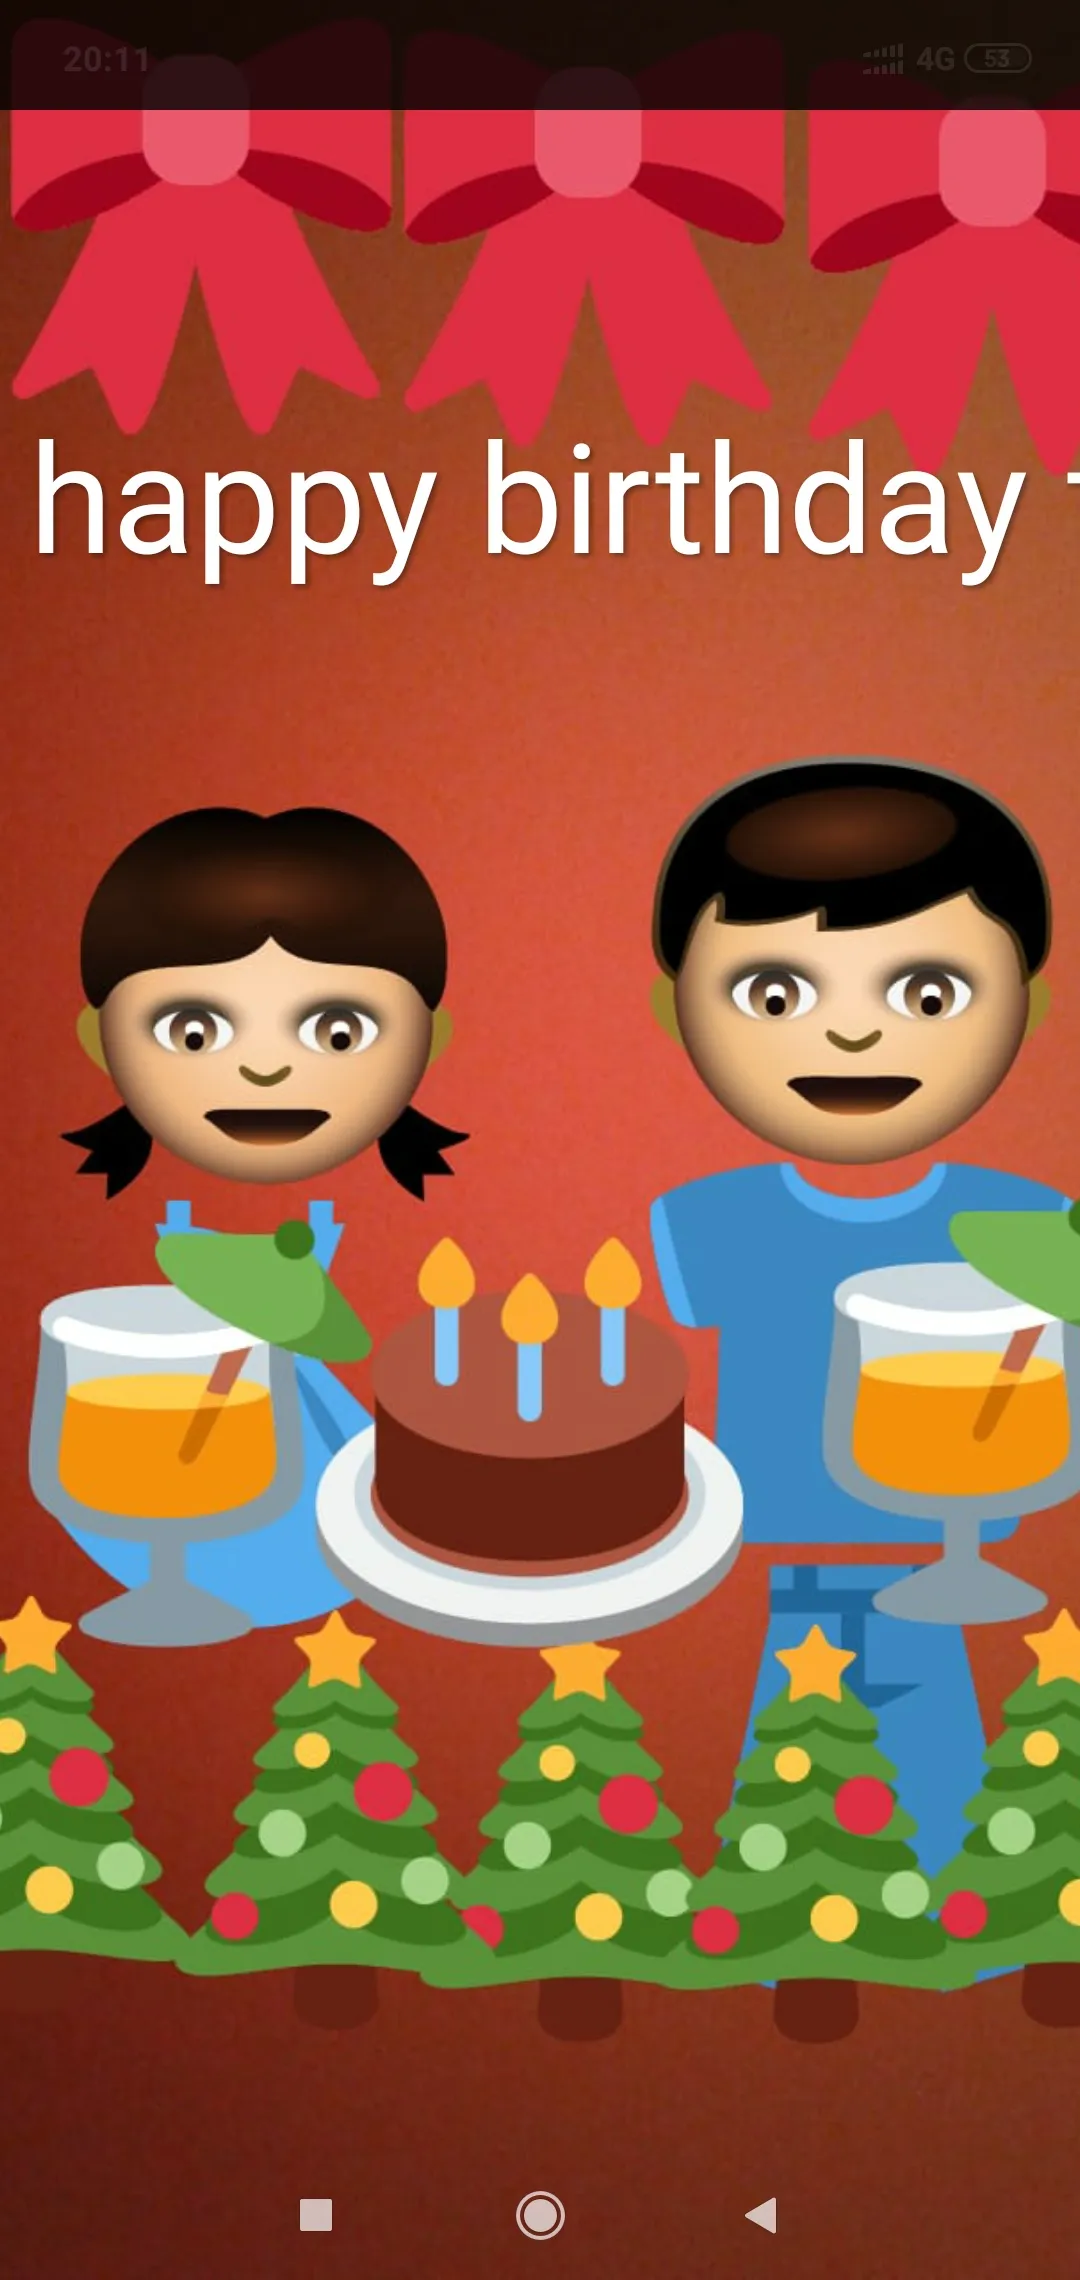 Happy Birthday Images • share chat user (@536133836) on ShareChat